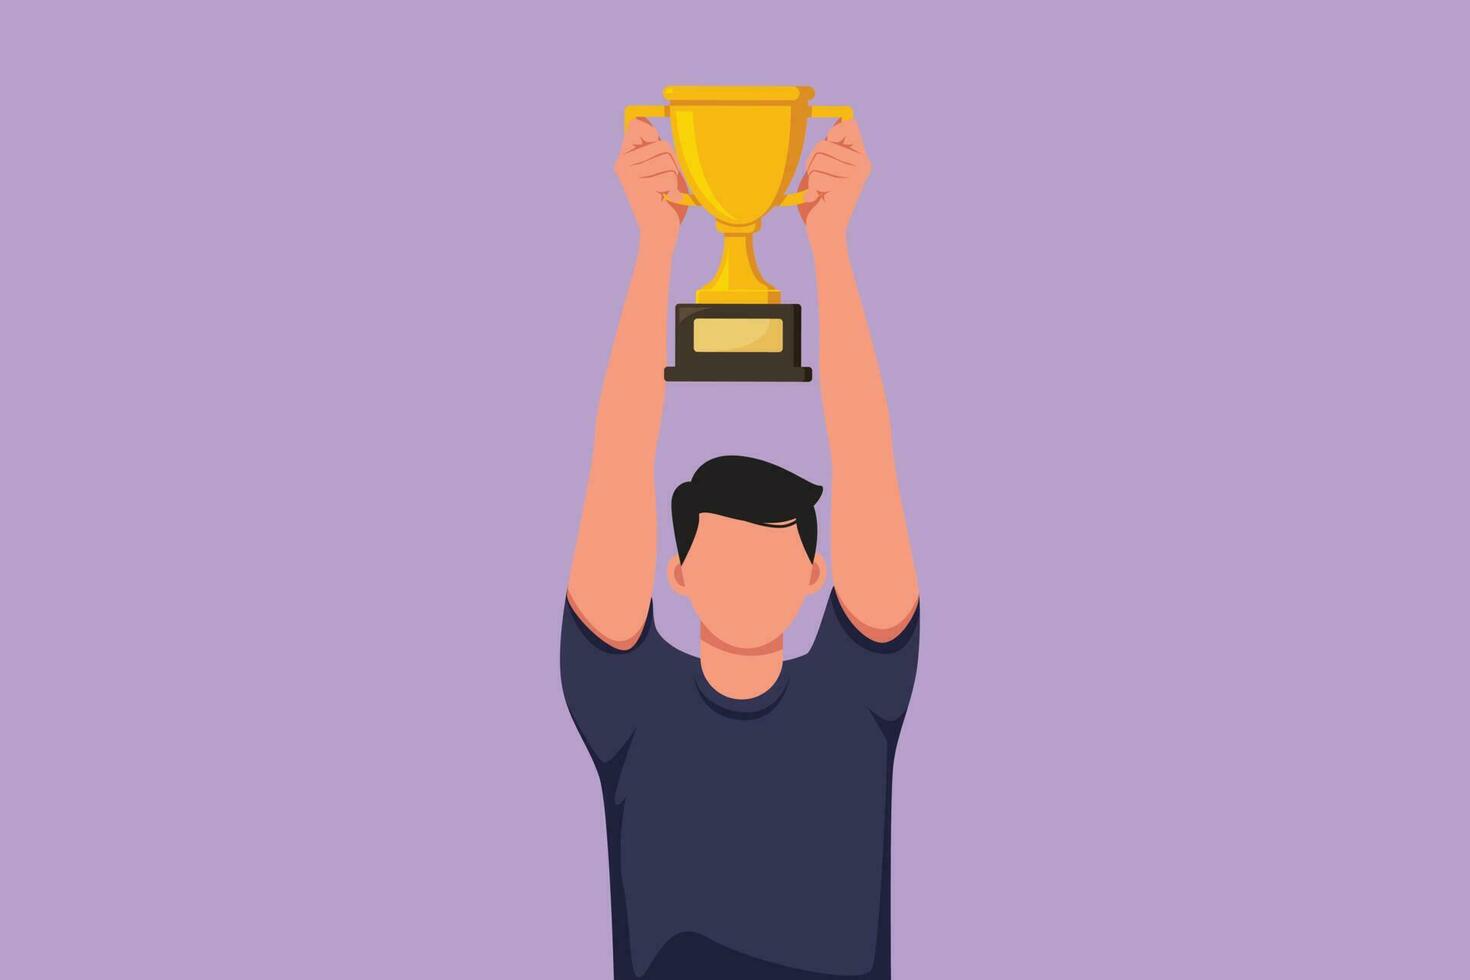 Cartoon flat style drawing male athlete wearing sport jersey lifting gold trophy with both hands. Happy man celebrating victory of national competition championship. Graphic design vector illustration